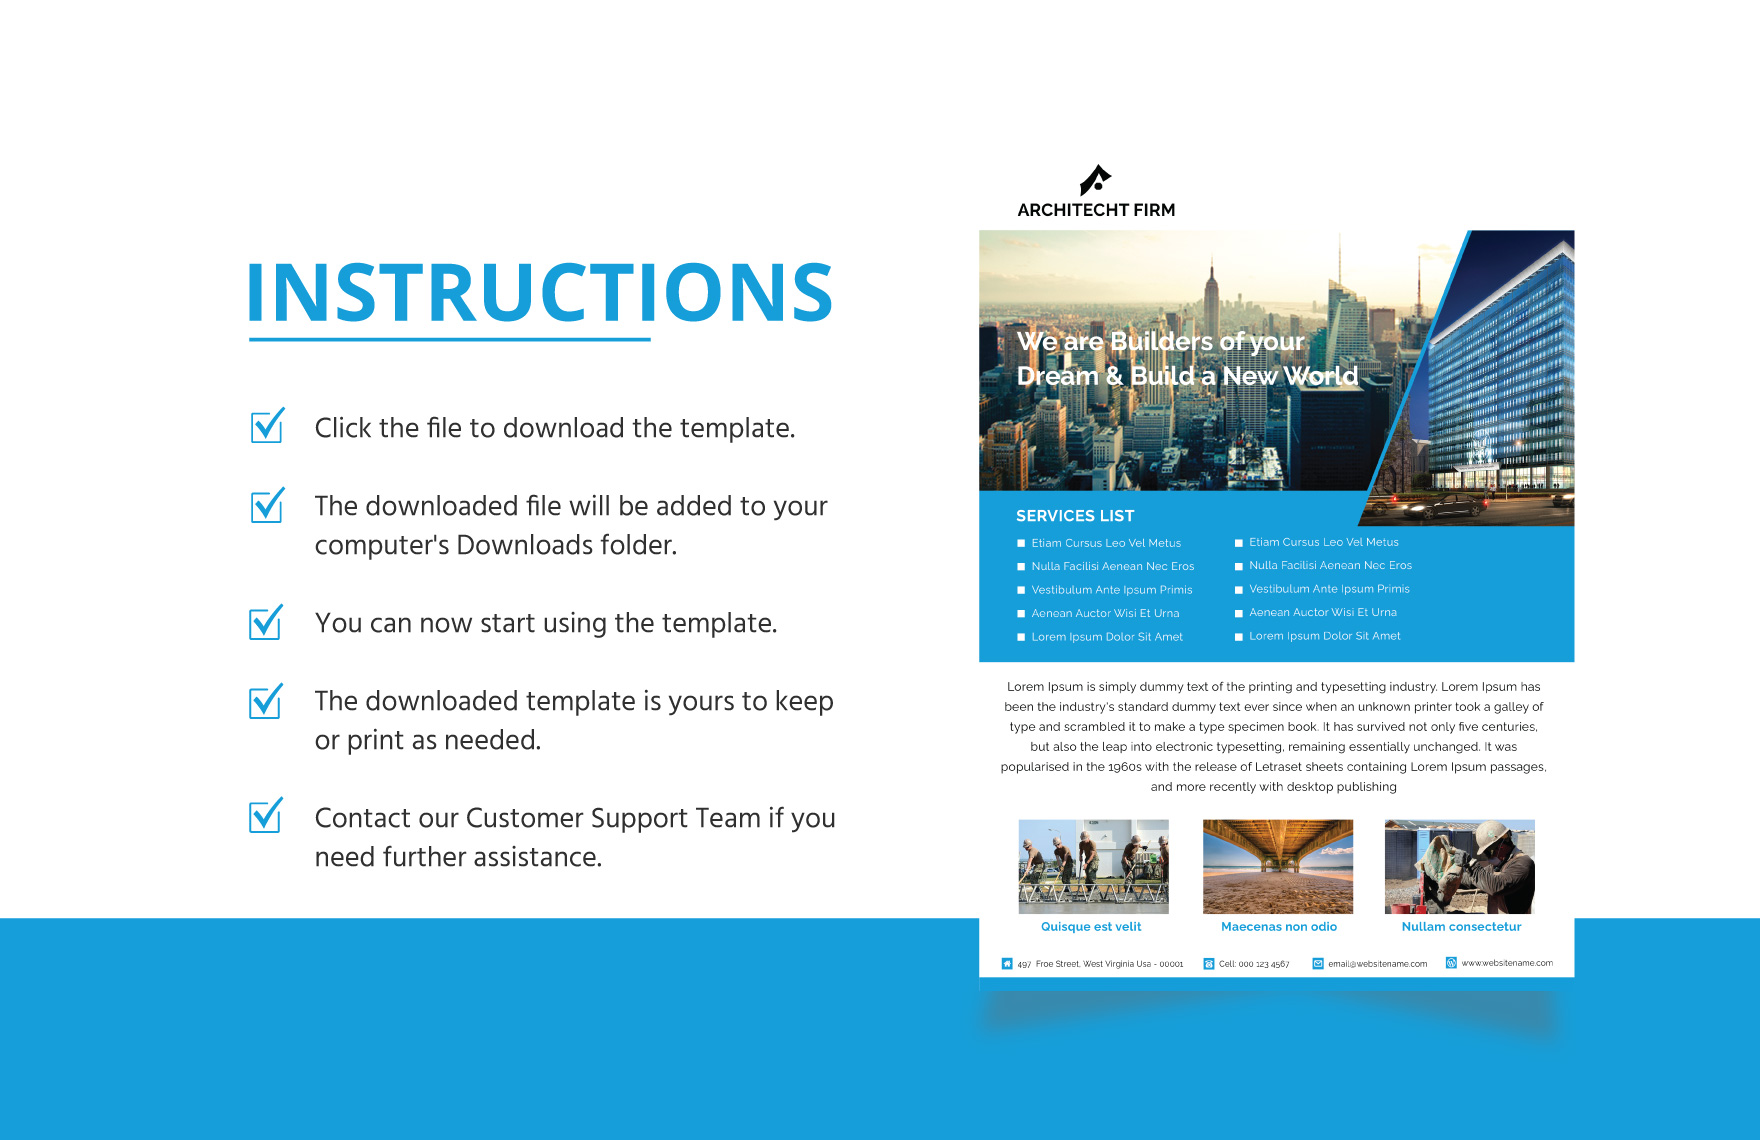 Architect Firm Design Flyer Template